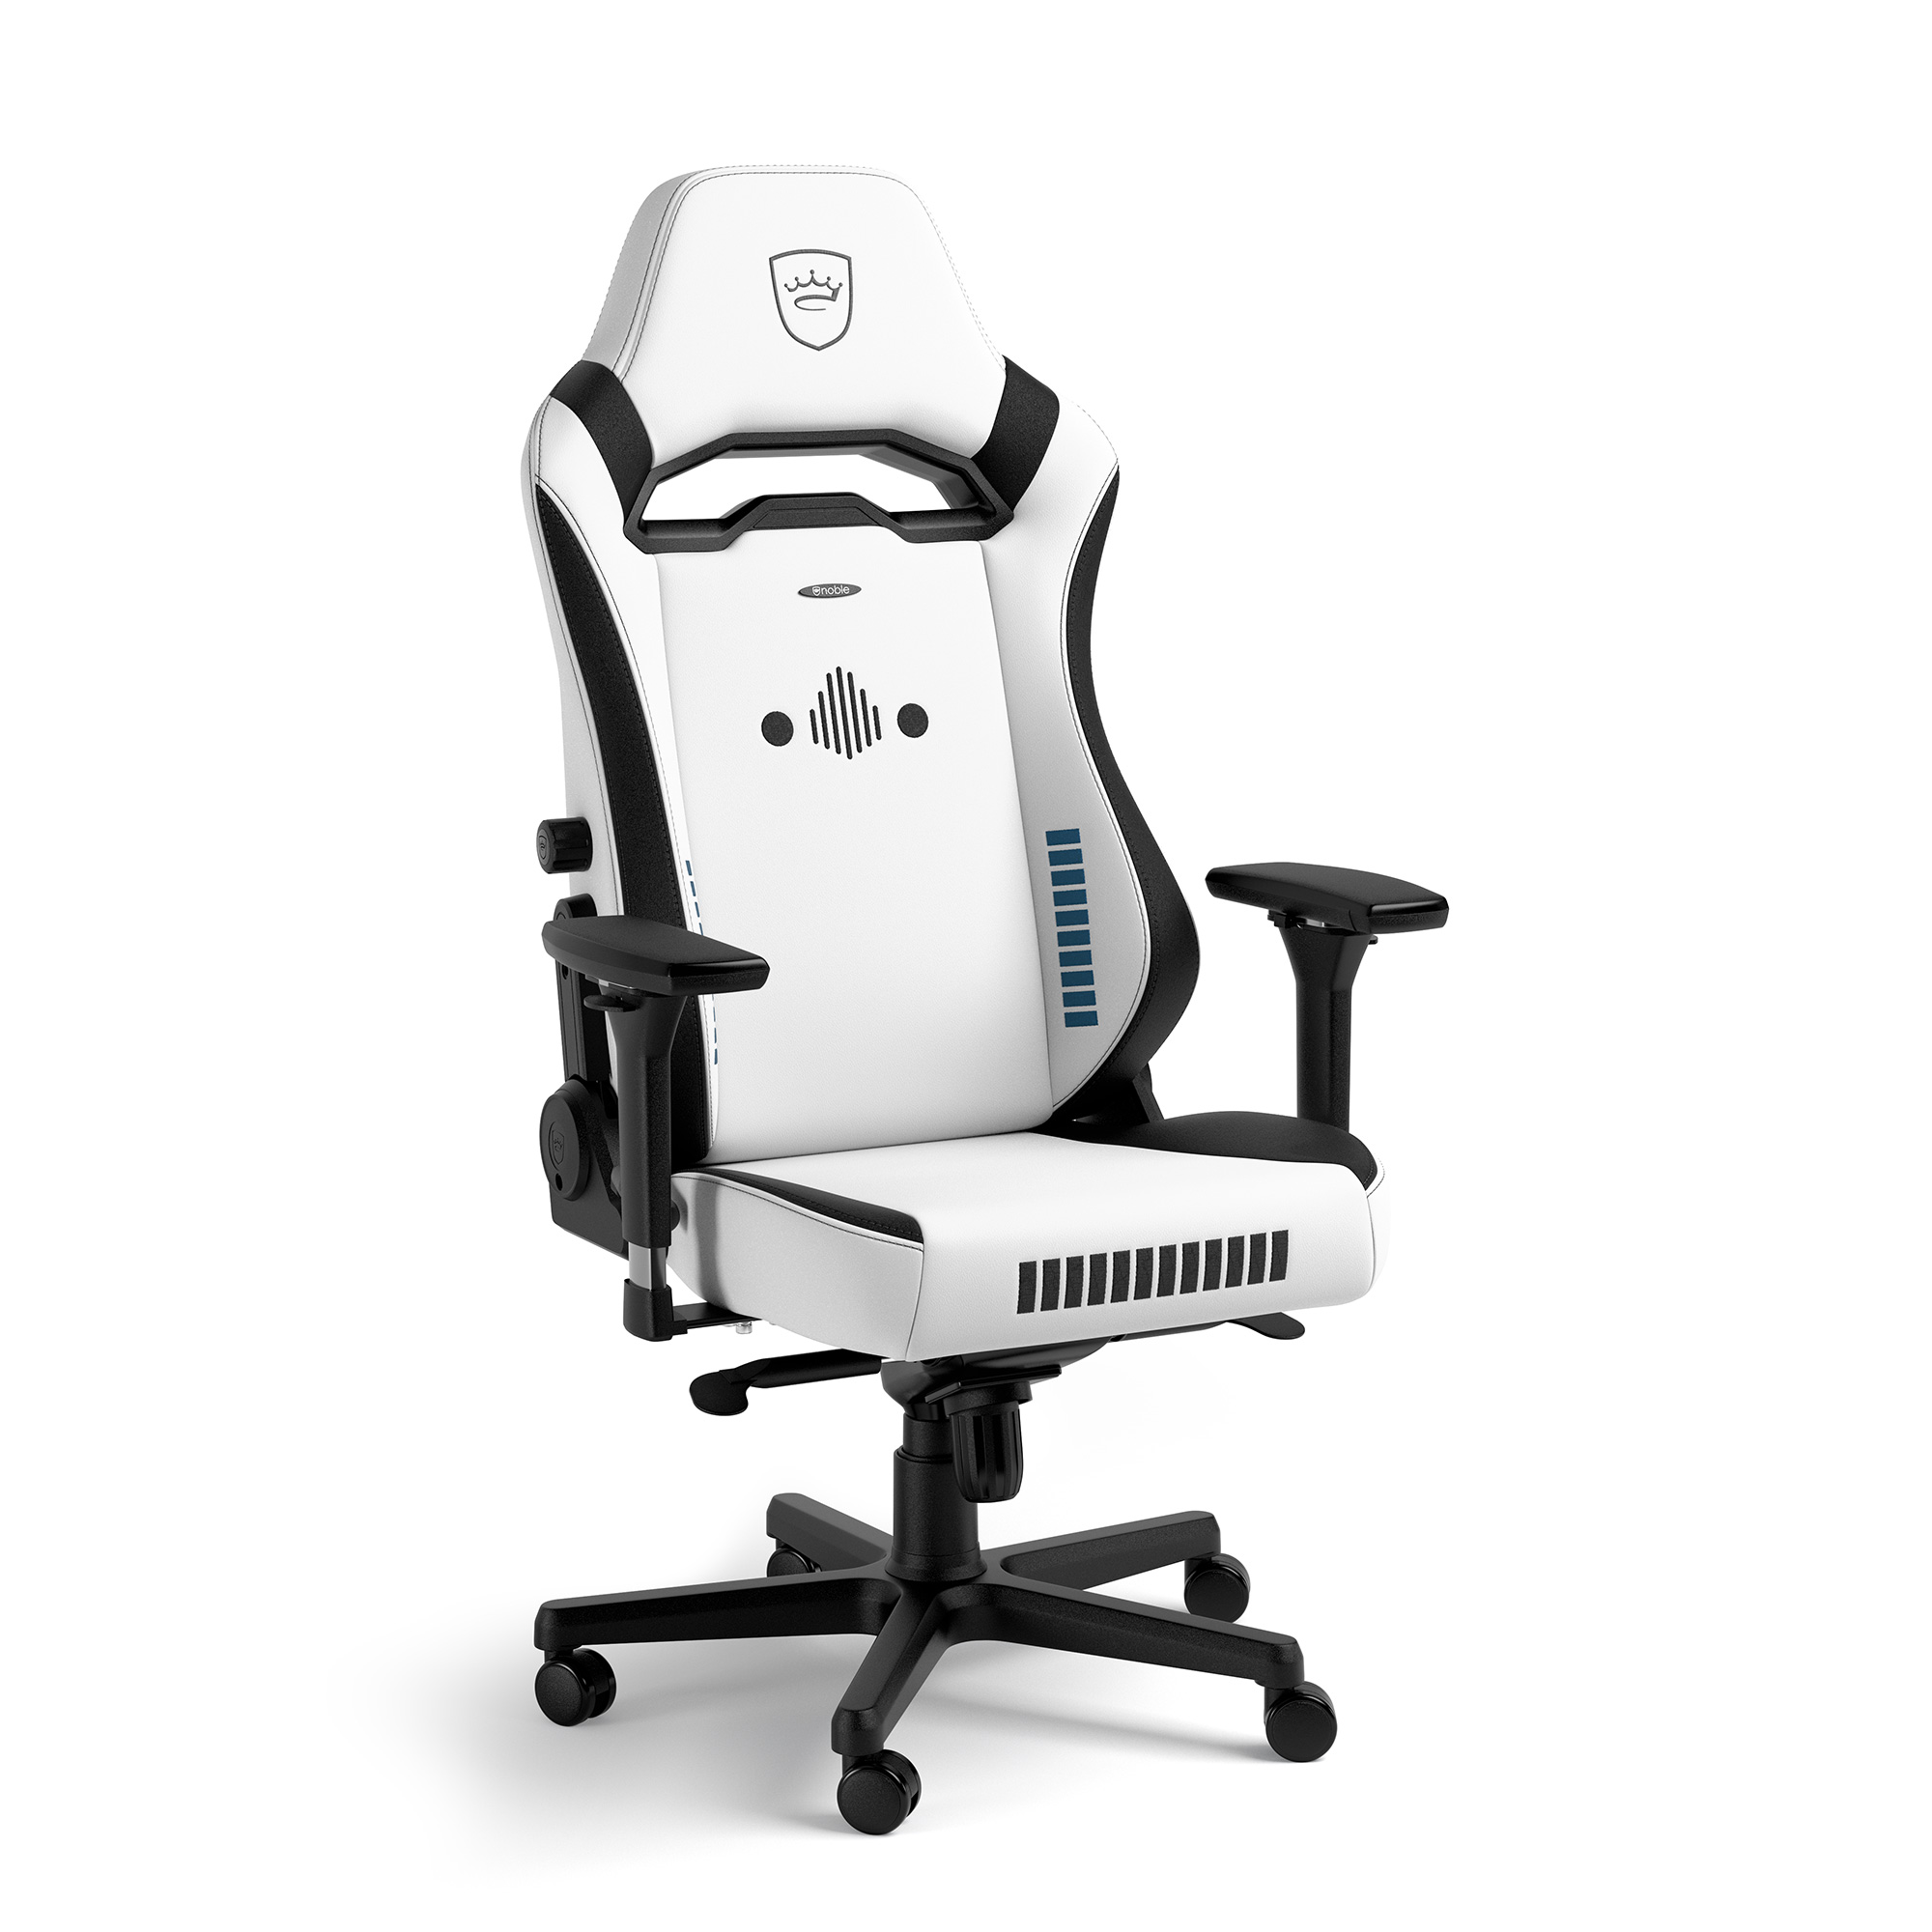 Gaming Chairs with Foot Rest at Overclockers UK